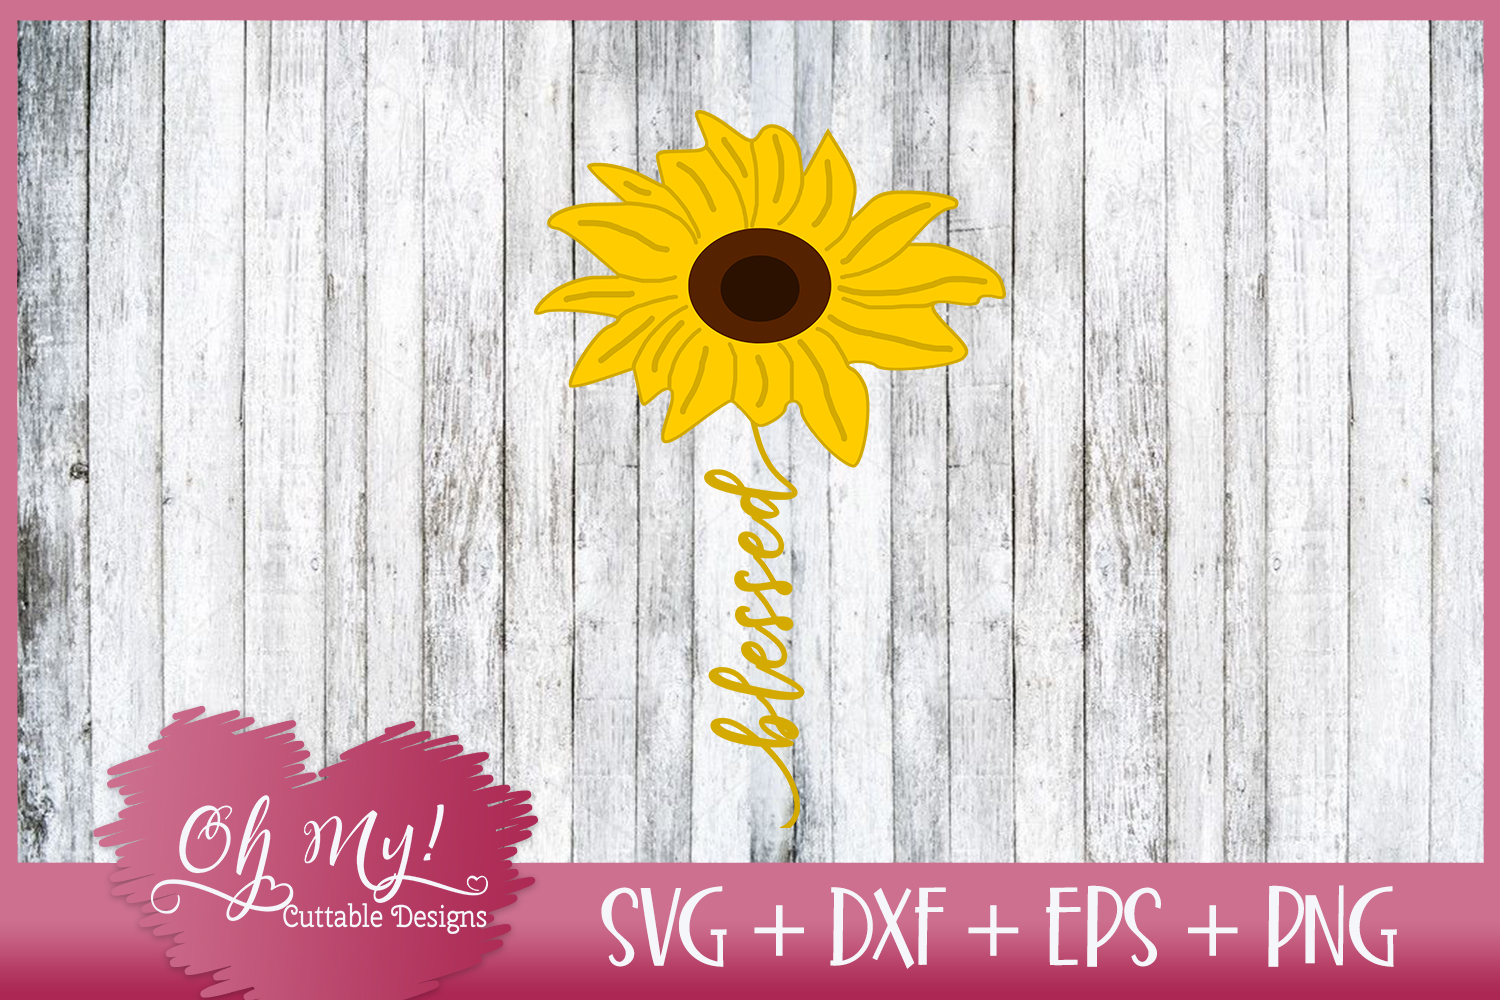 Download Blessed Sunflower - SVG EPS DXF PNG Cutting File (245873 ...